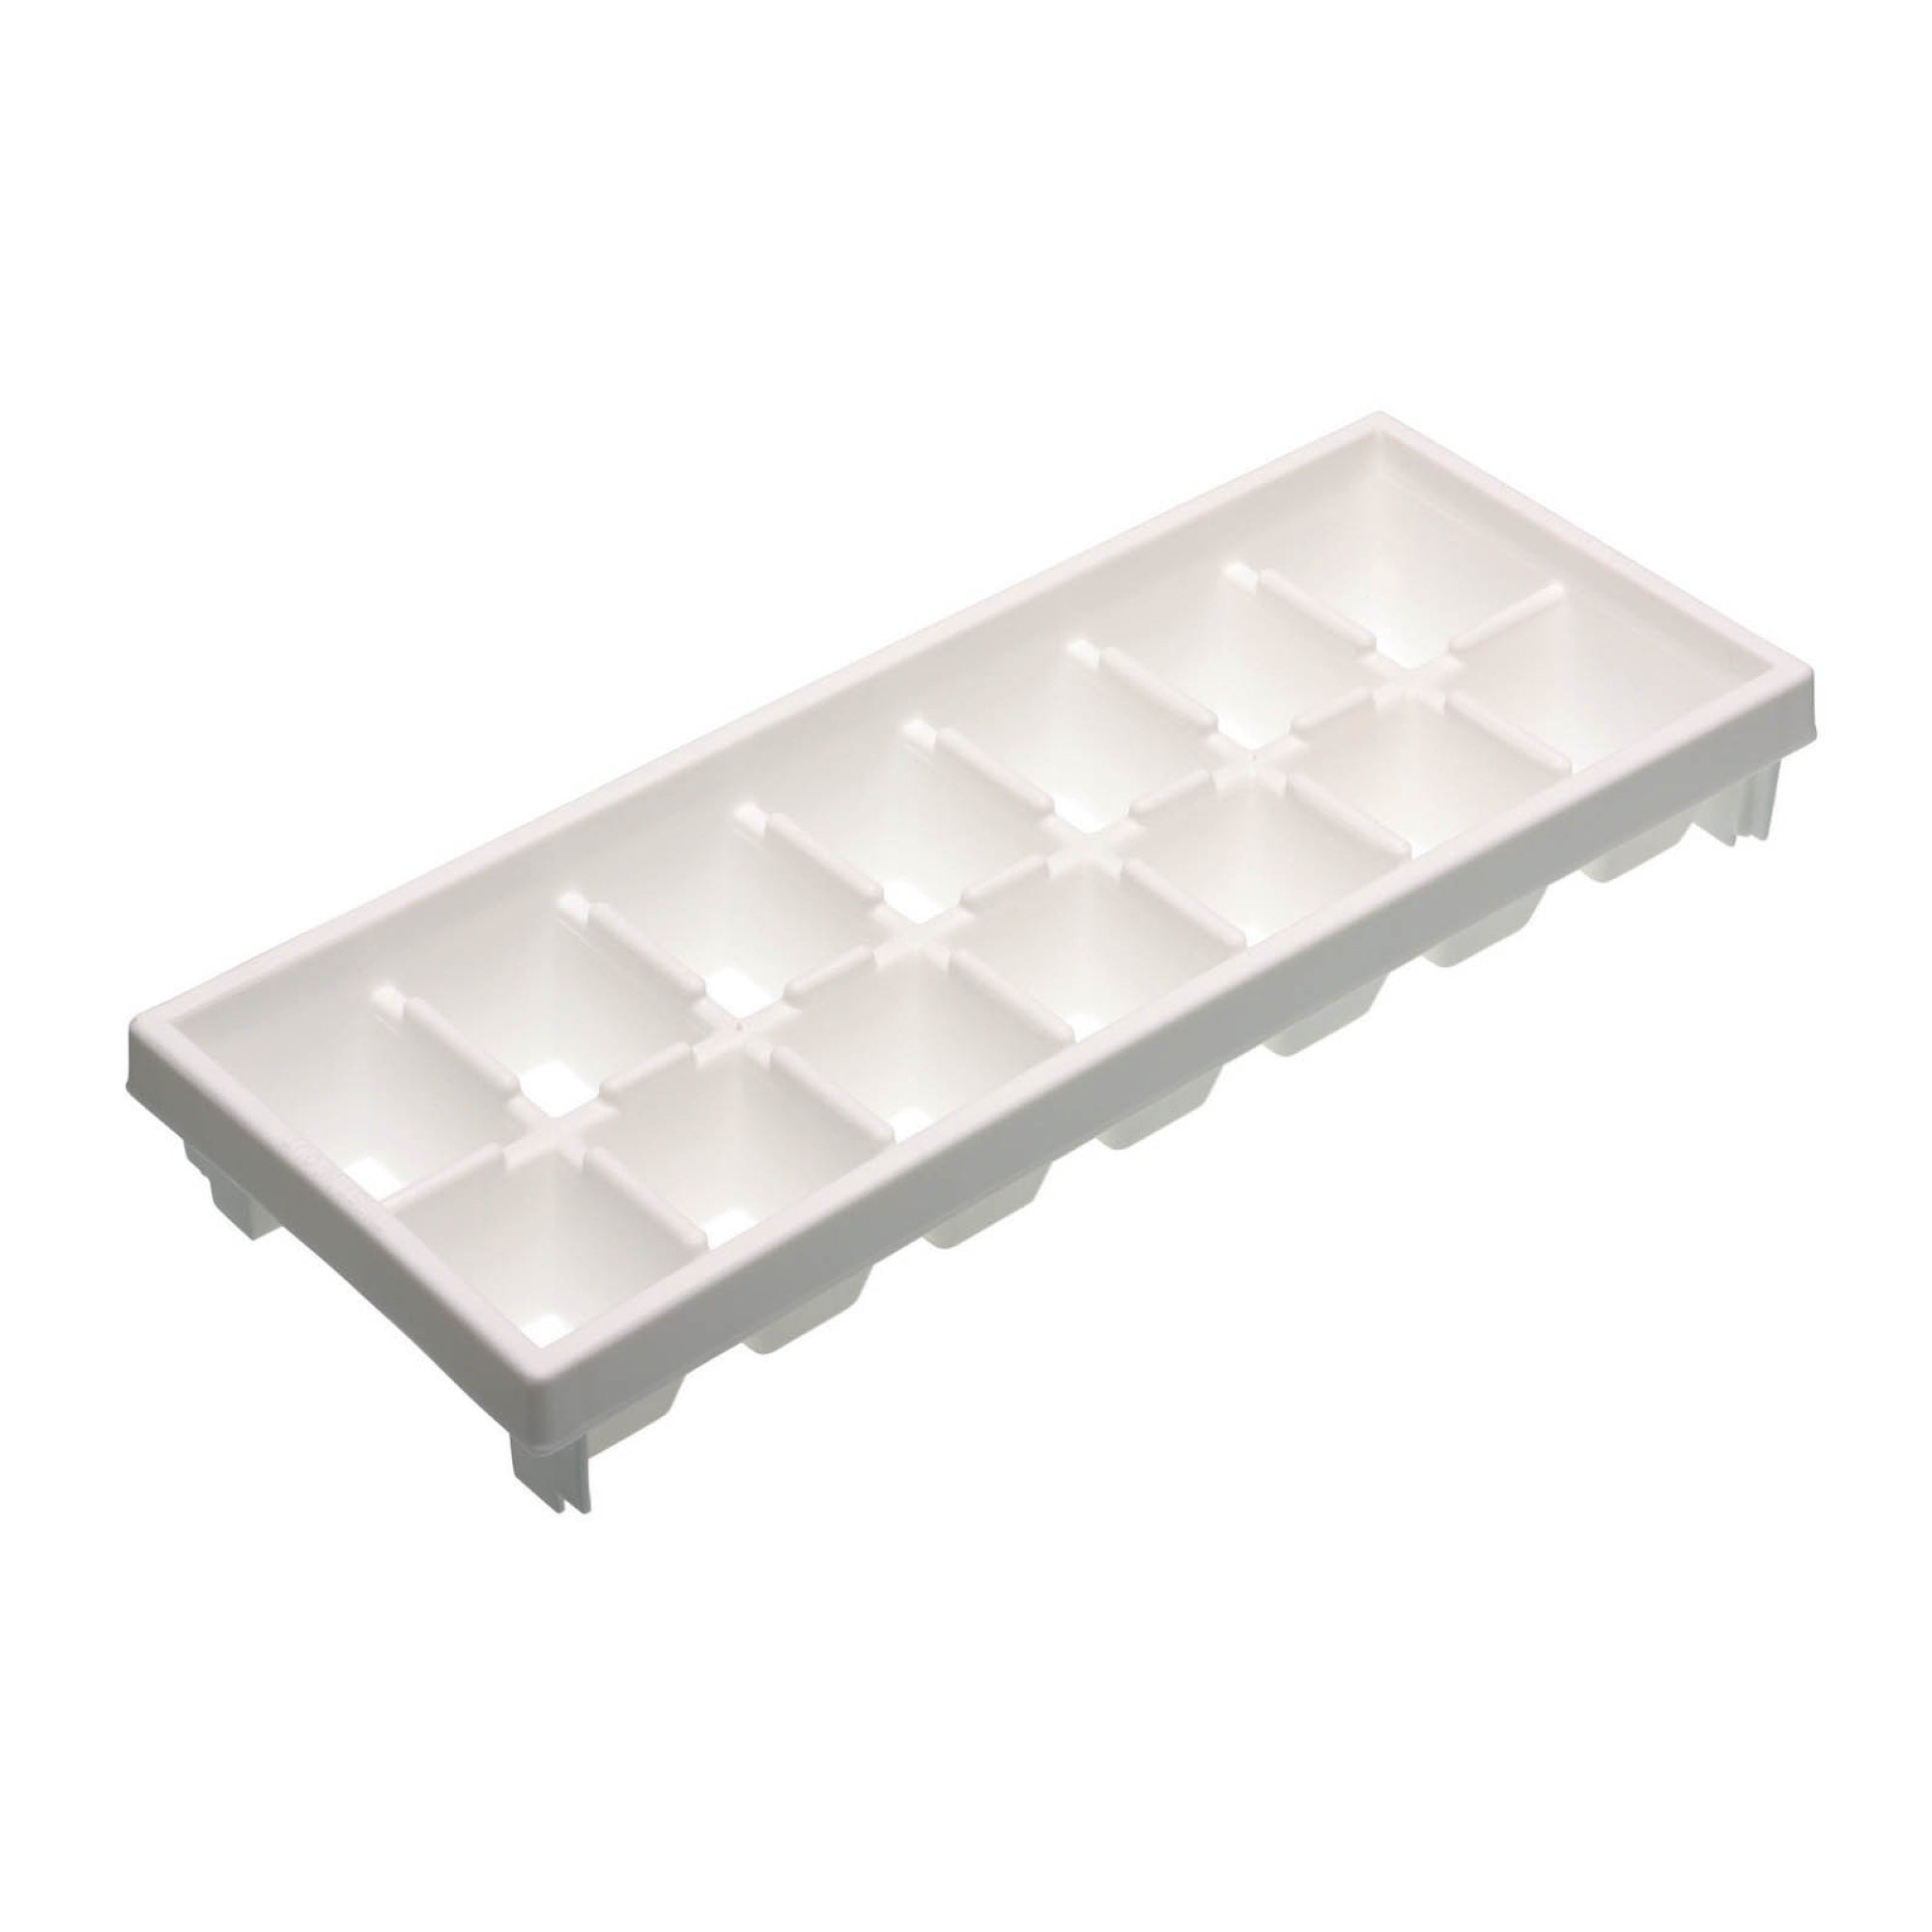 KitchenCraft Flexible Plastic Ice Cube Tray - The Cooks Cupboard Ltd